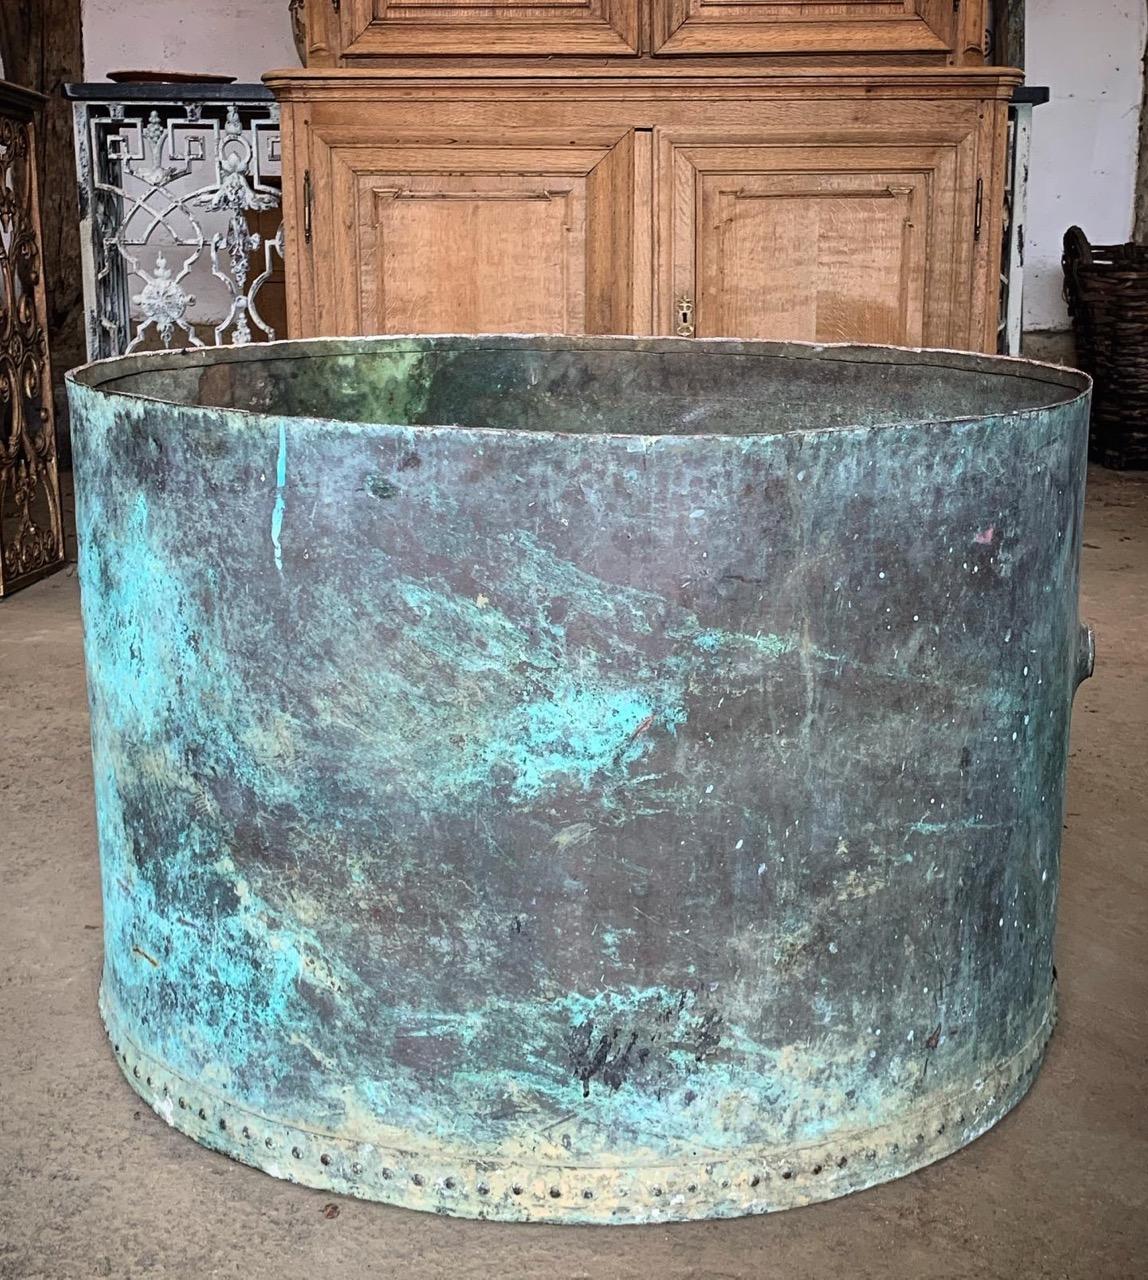 A lovely large 19th century riveted copper tank from France. The copper has a nice natural verdigris colour. This would make a wonderful garden planter. It does have holes where pipe work was attached so is not water tight. But the holes would make